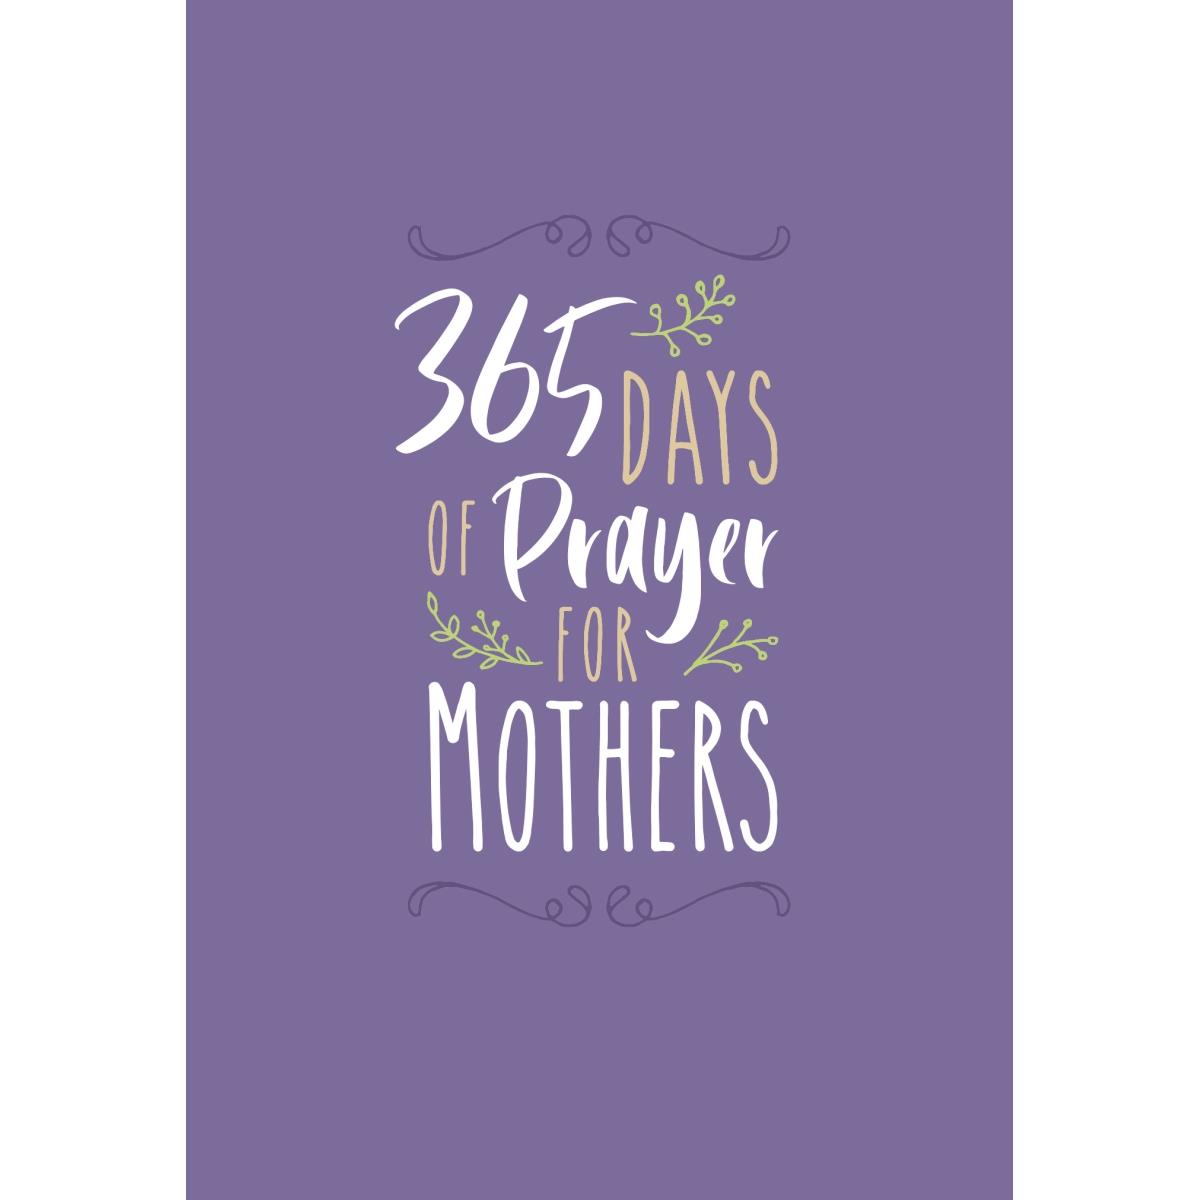 154505 365 Days Of Prayer For Mothers